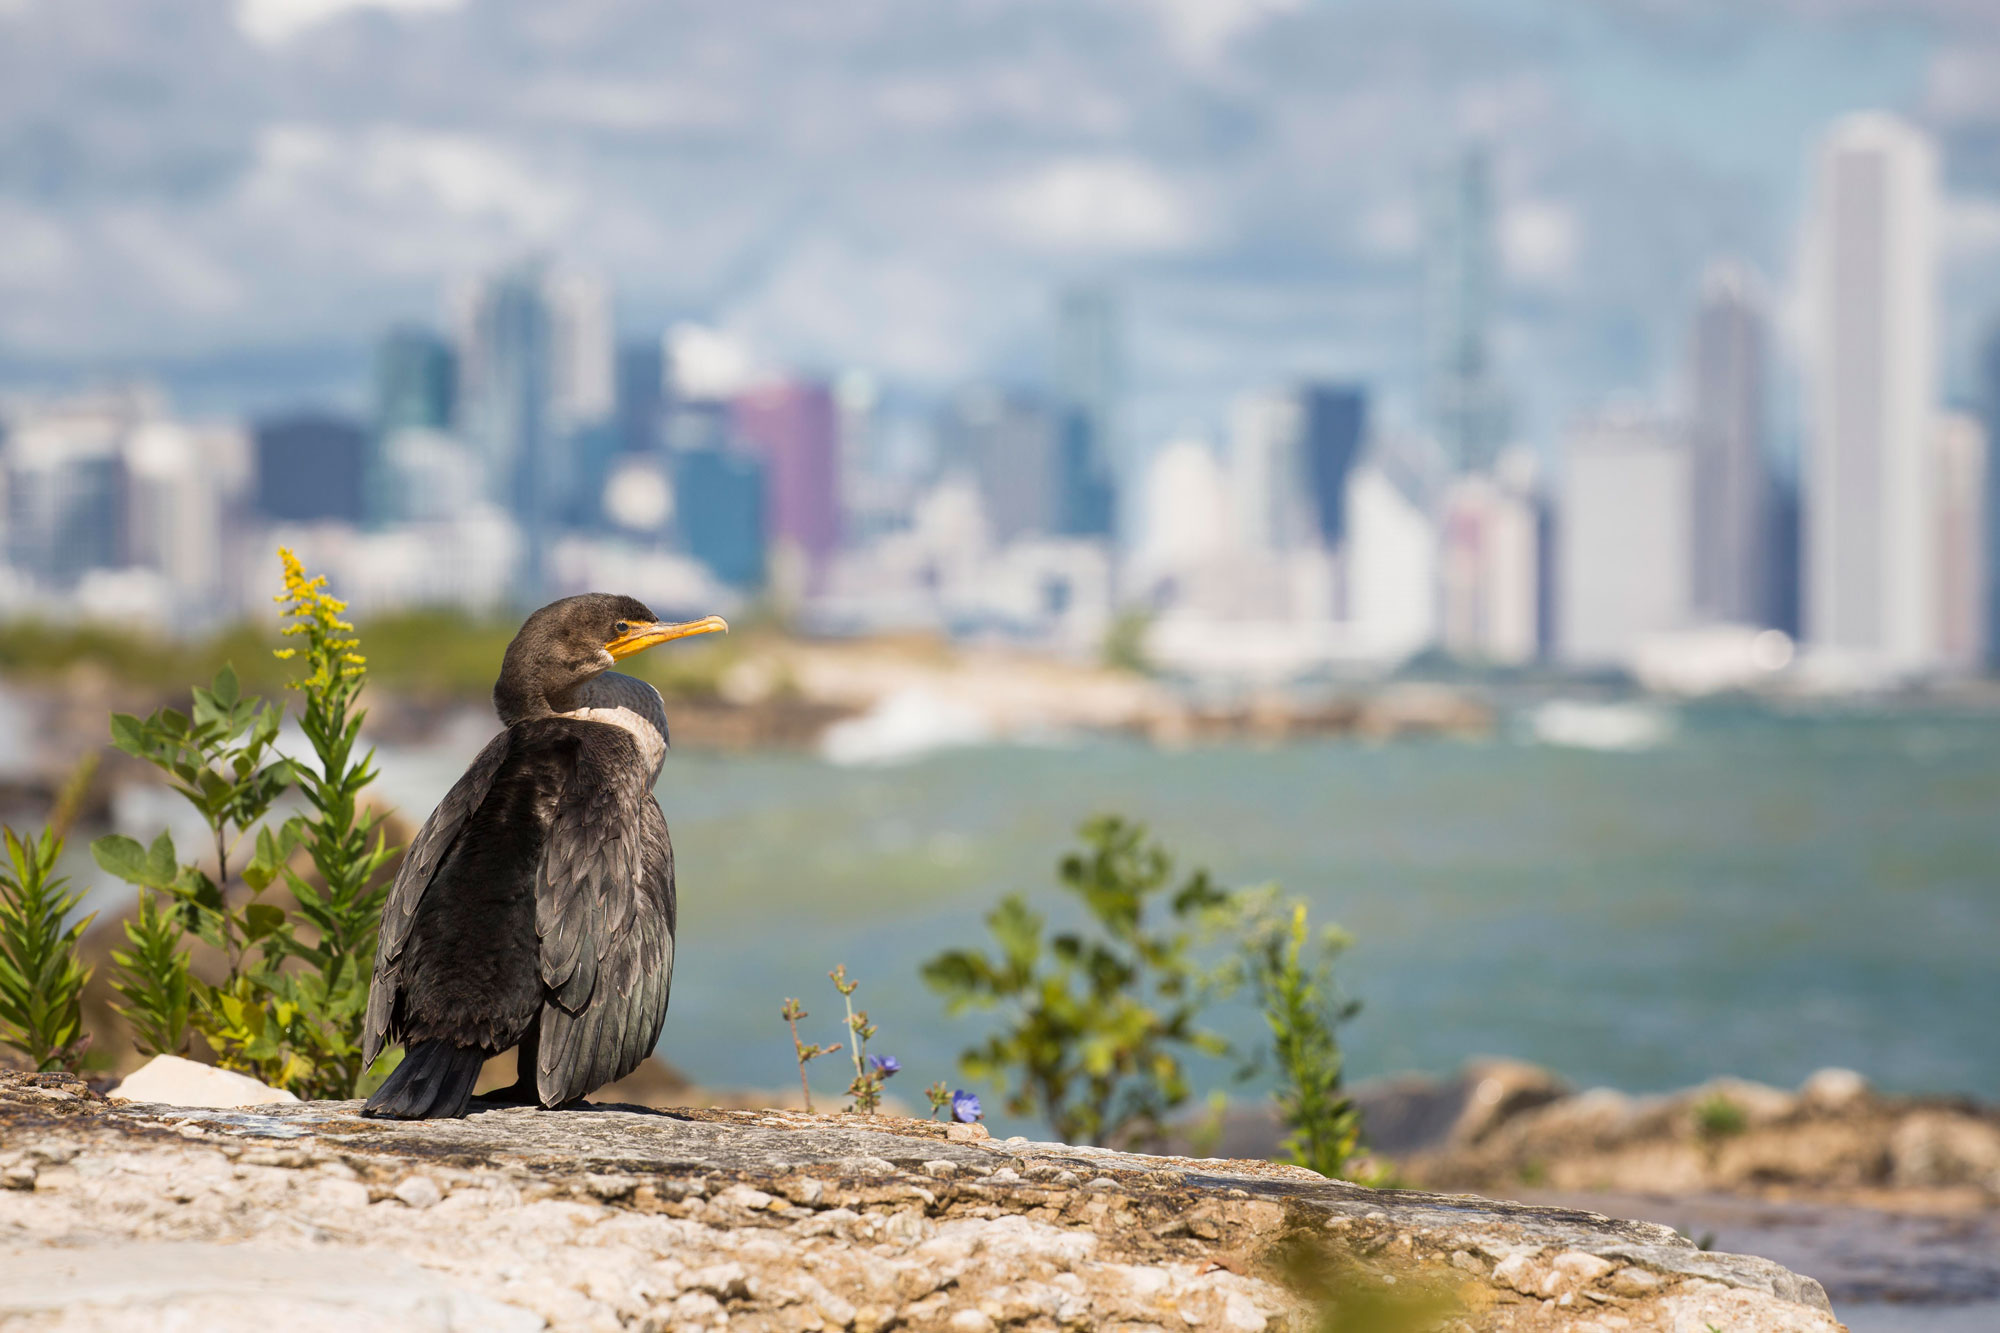 A water bird perches on a rock near a few small plants. A body of water and the Chicago skyline are out of focus in the far distance.